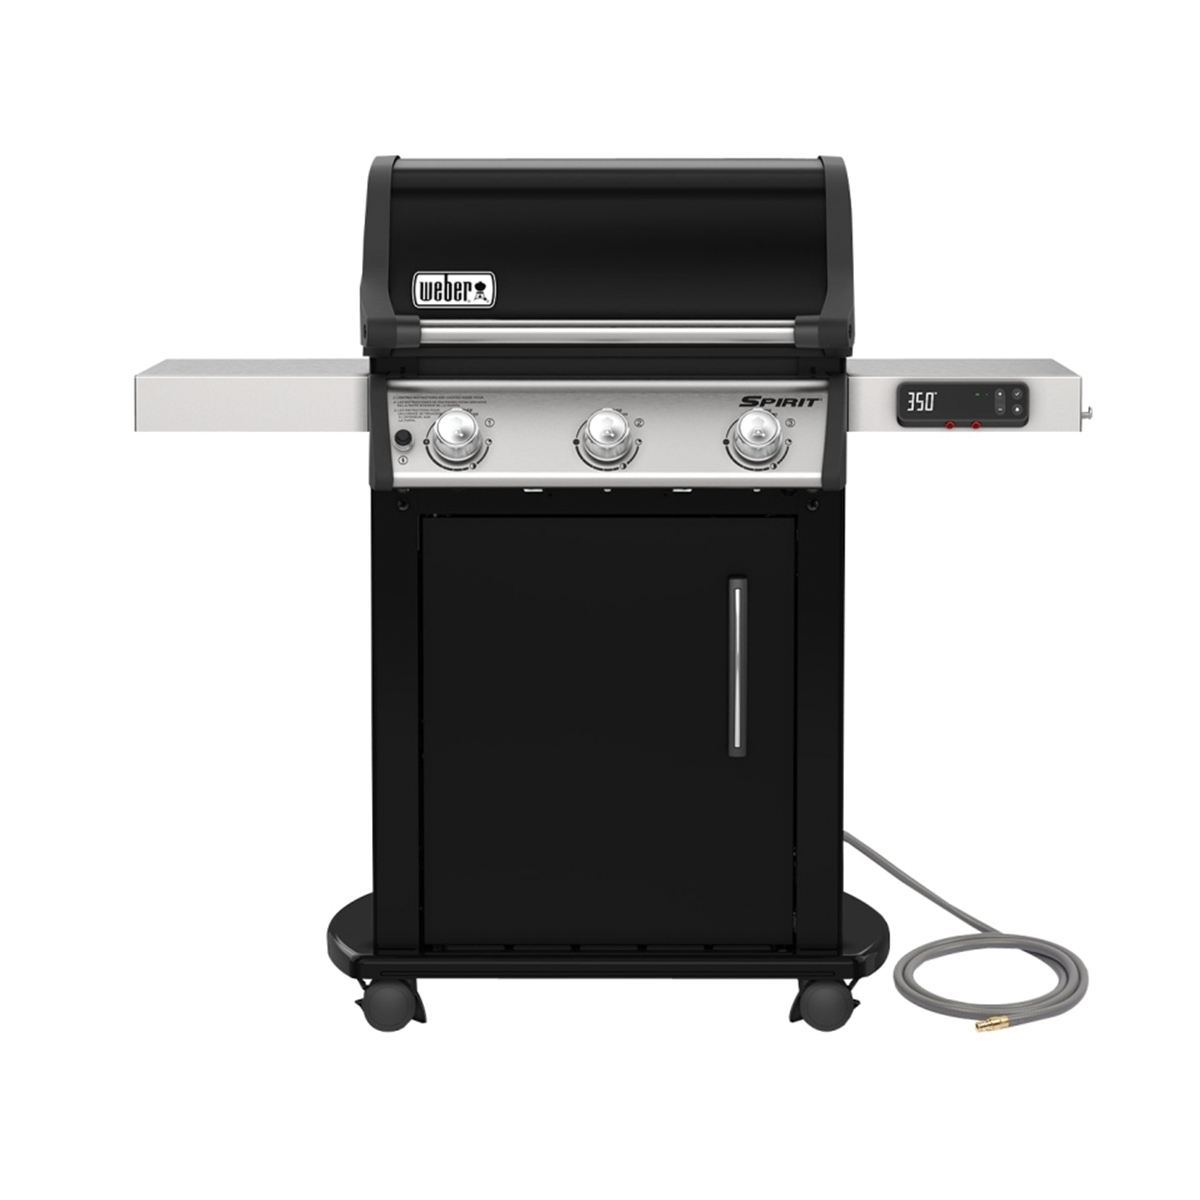 Weber Spirit EX-315 Series 47512401 Gas Grill, 39,000 Btu, Natural Gas, 3-Burner, 424 sq-in Primary Cooking Surface